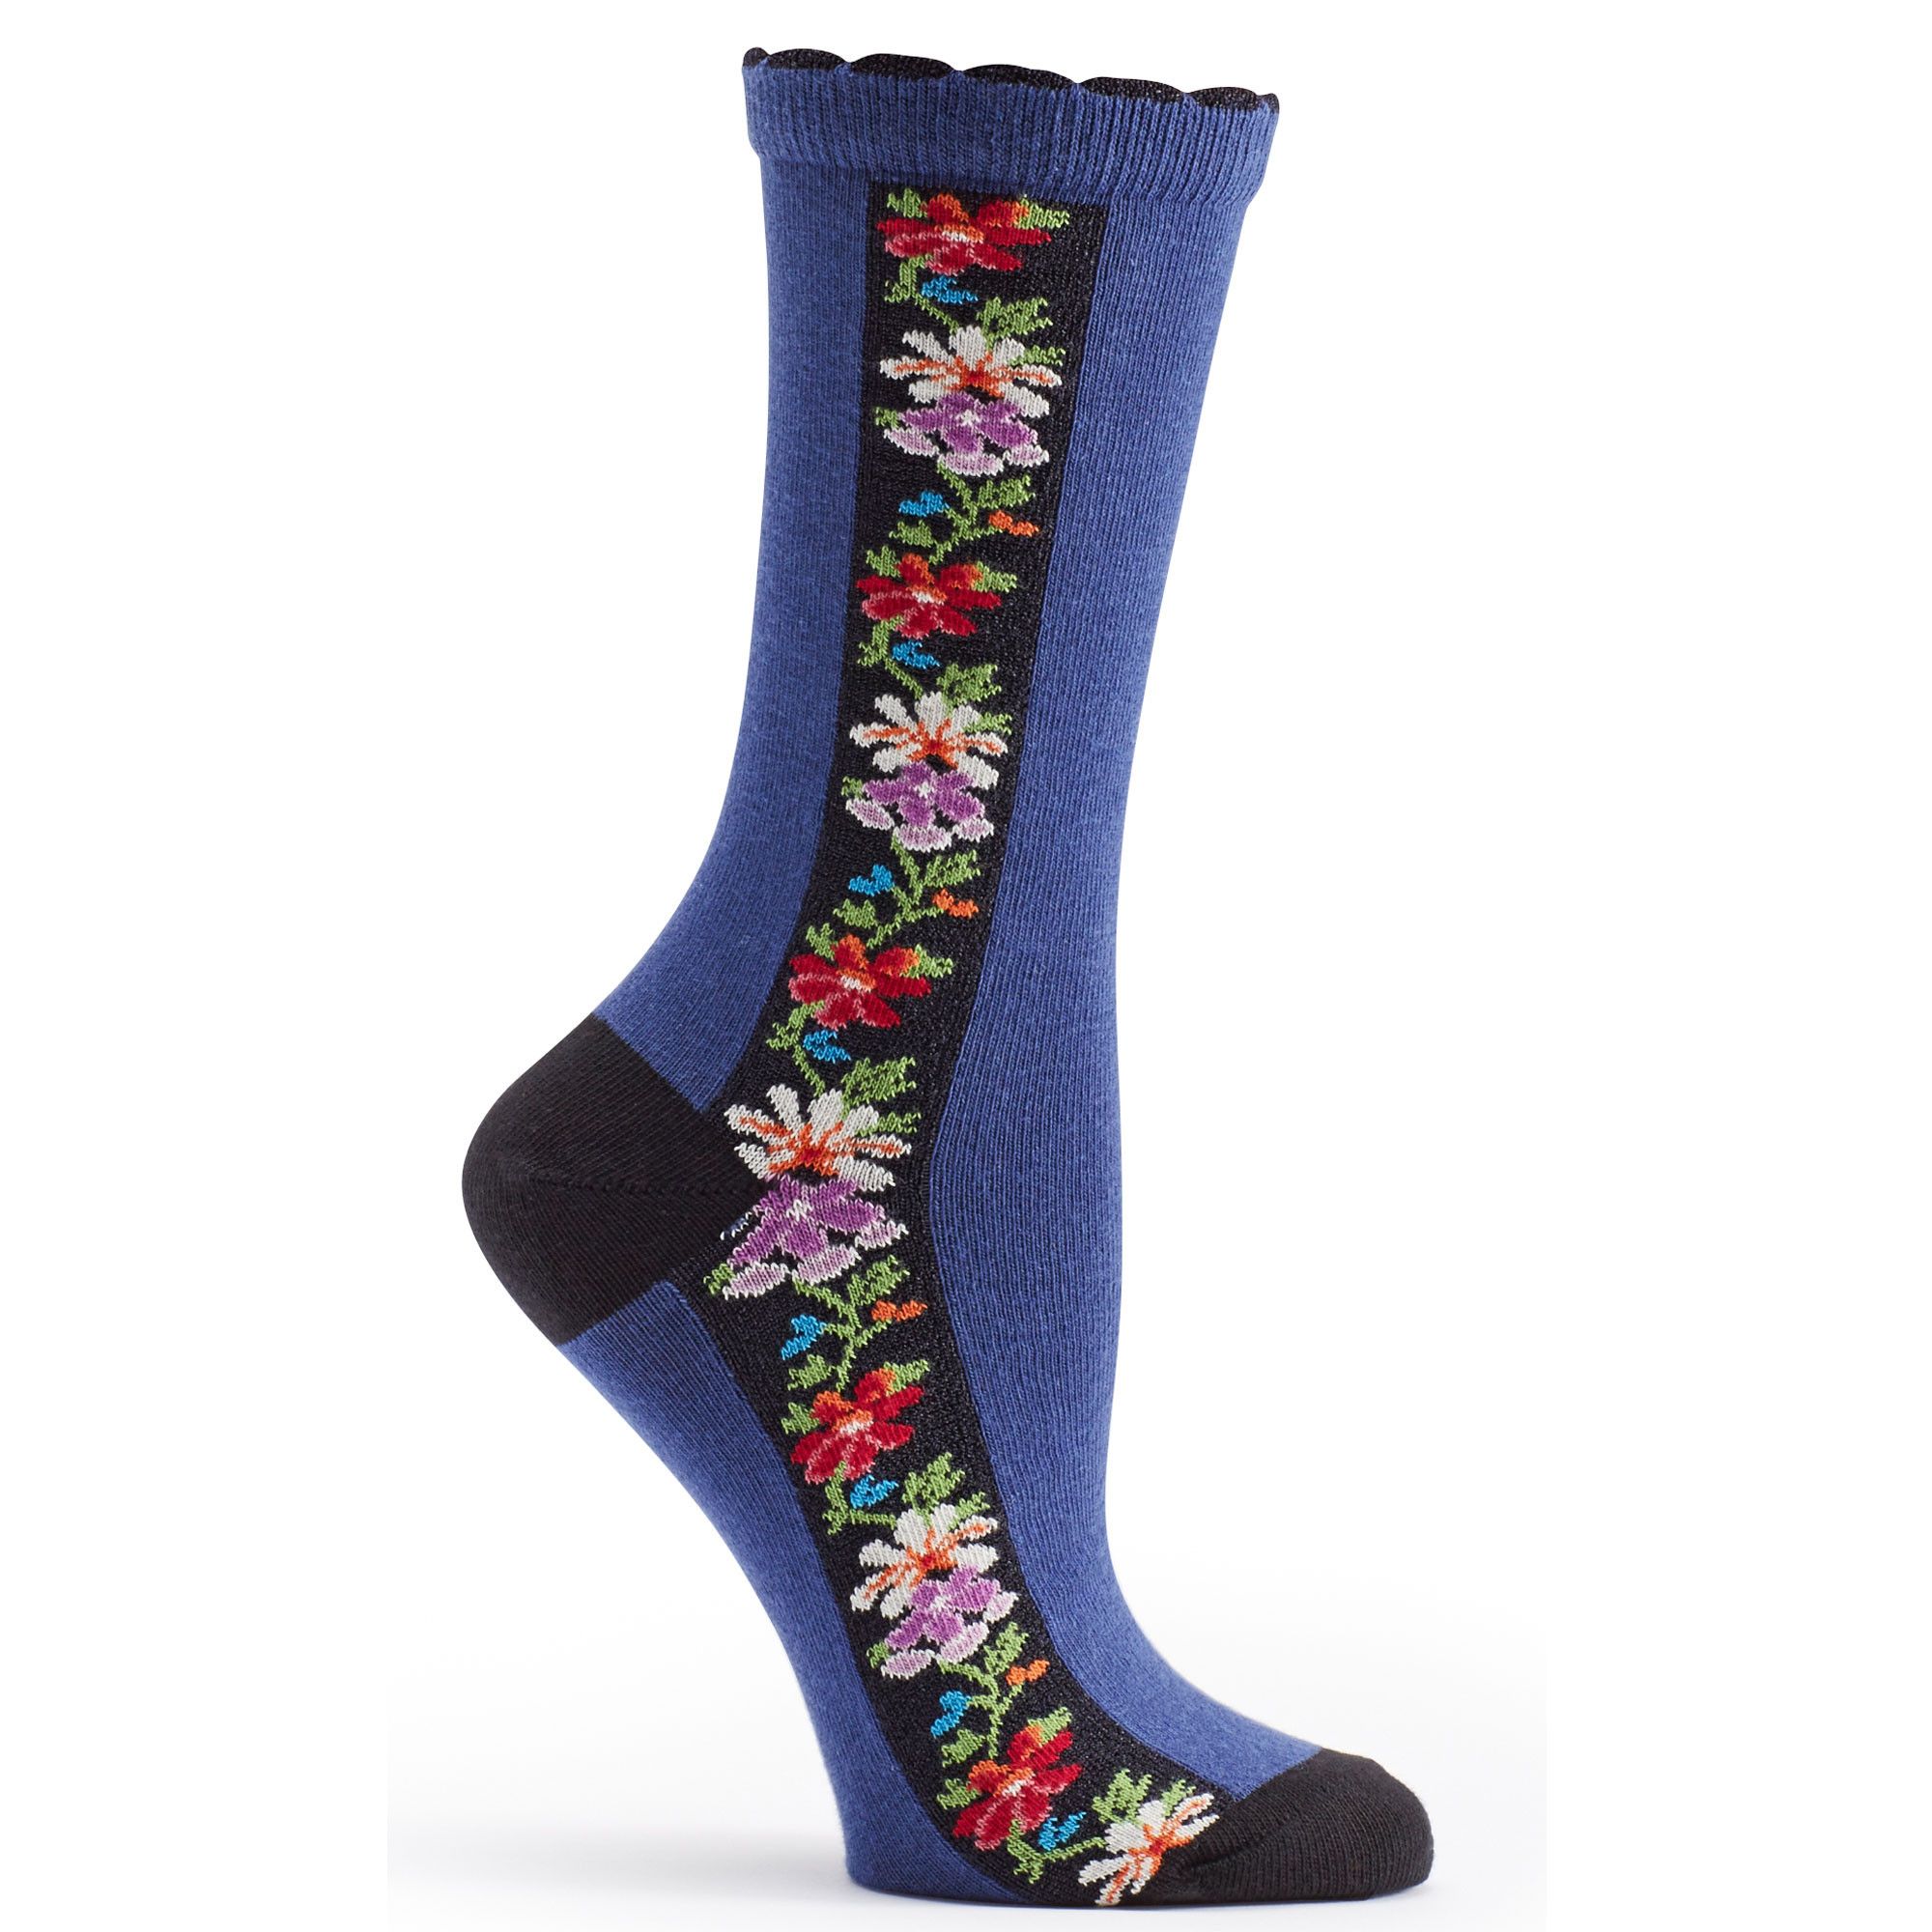 Ozone Socks Floral Nordic Stripe Sock - Assorted Colors - Free Shipping!